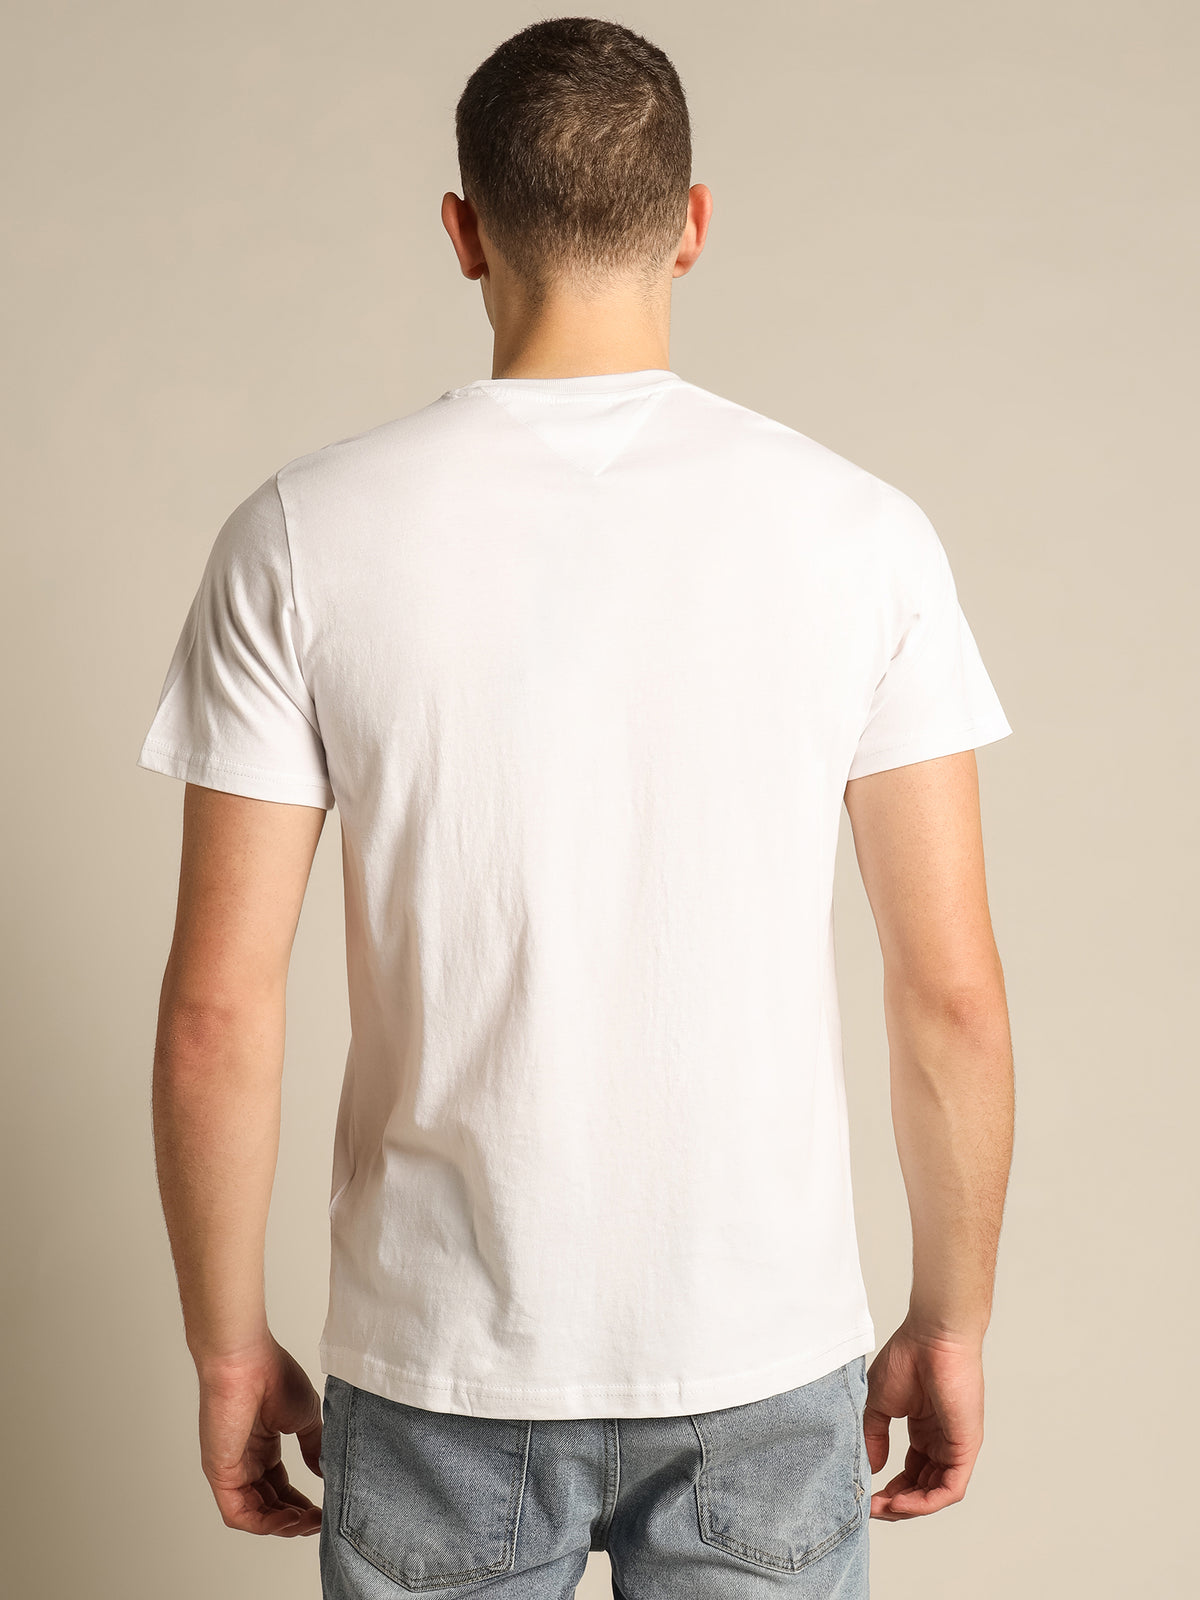 Entry Print T-Shirt in White